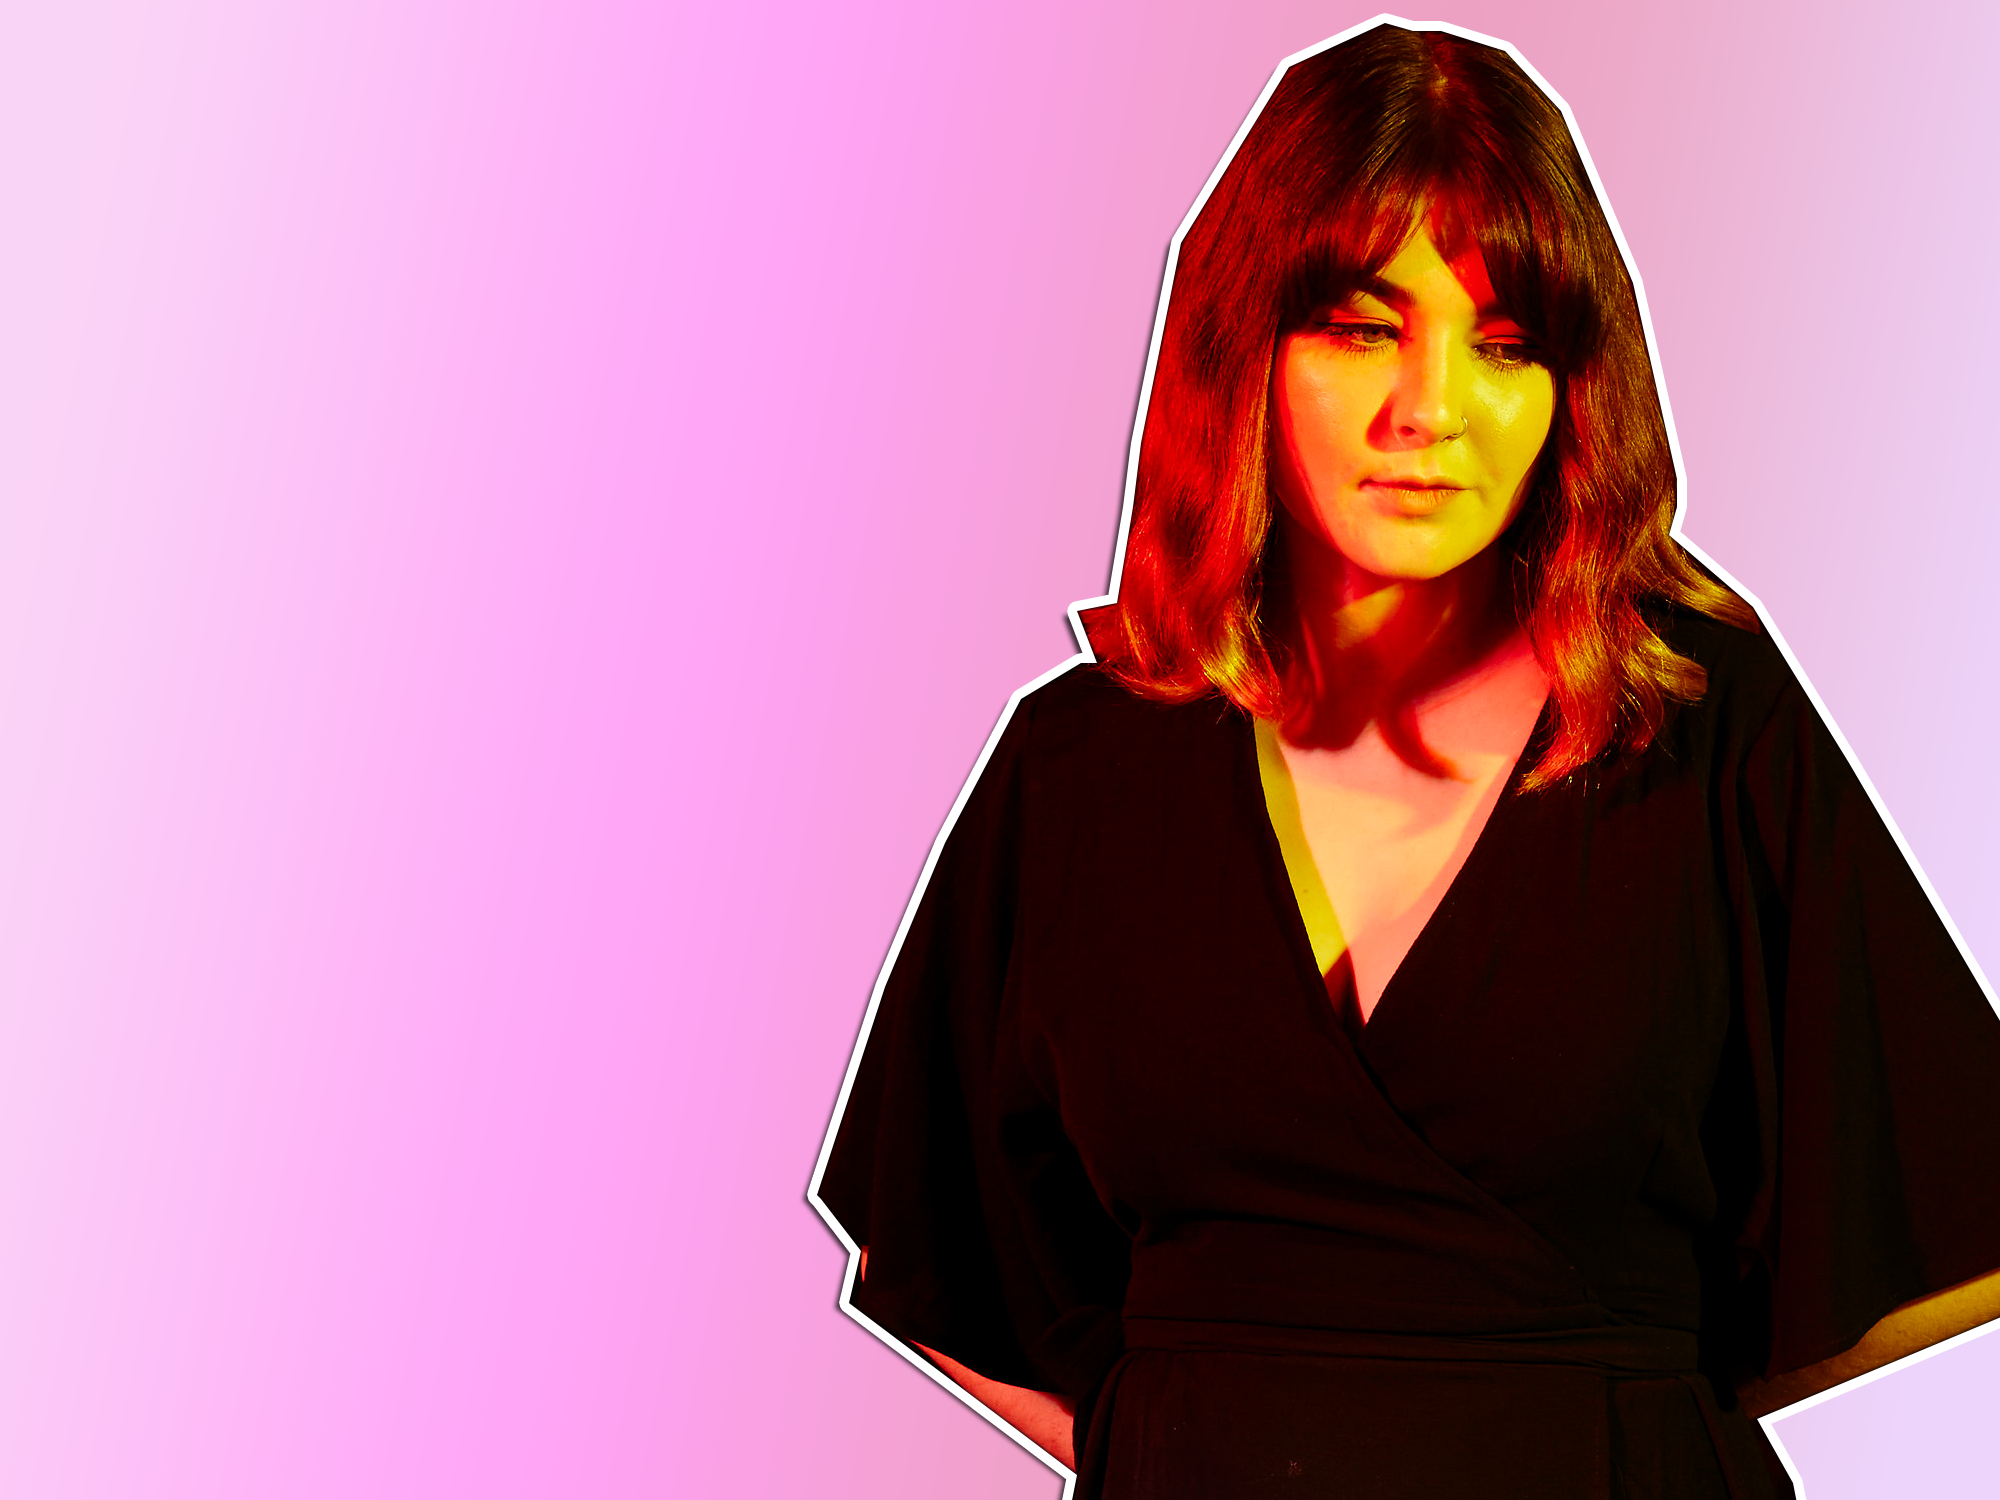 Yumi Zouma’s Christie Simpson: “The music industry is simply not a friendly place for women”